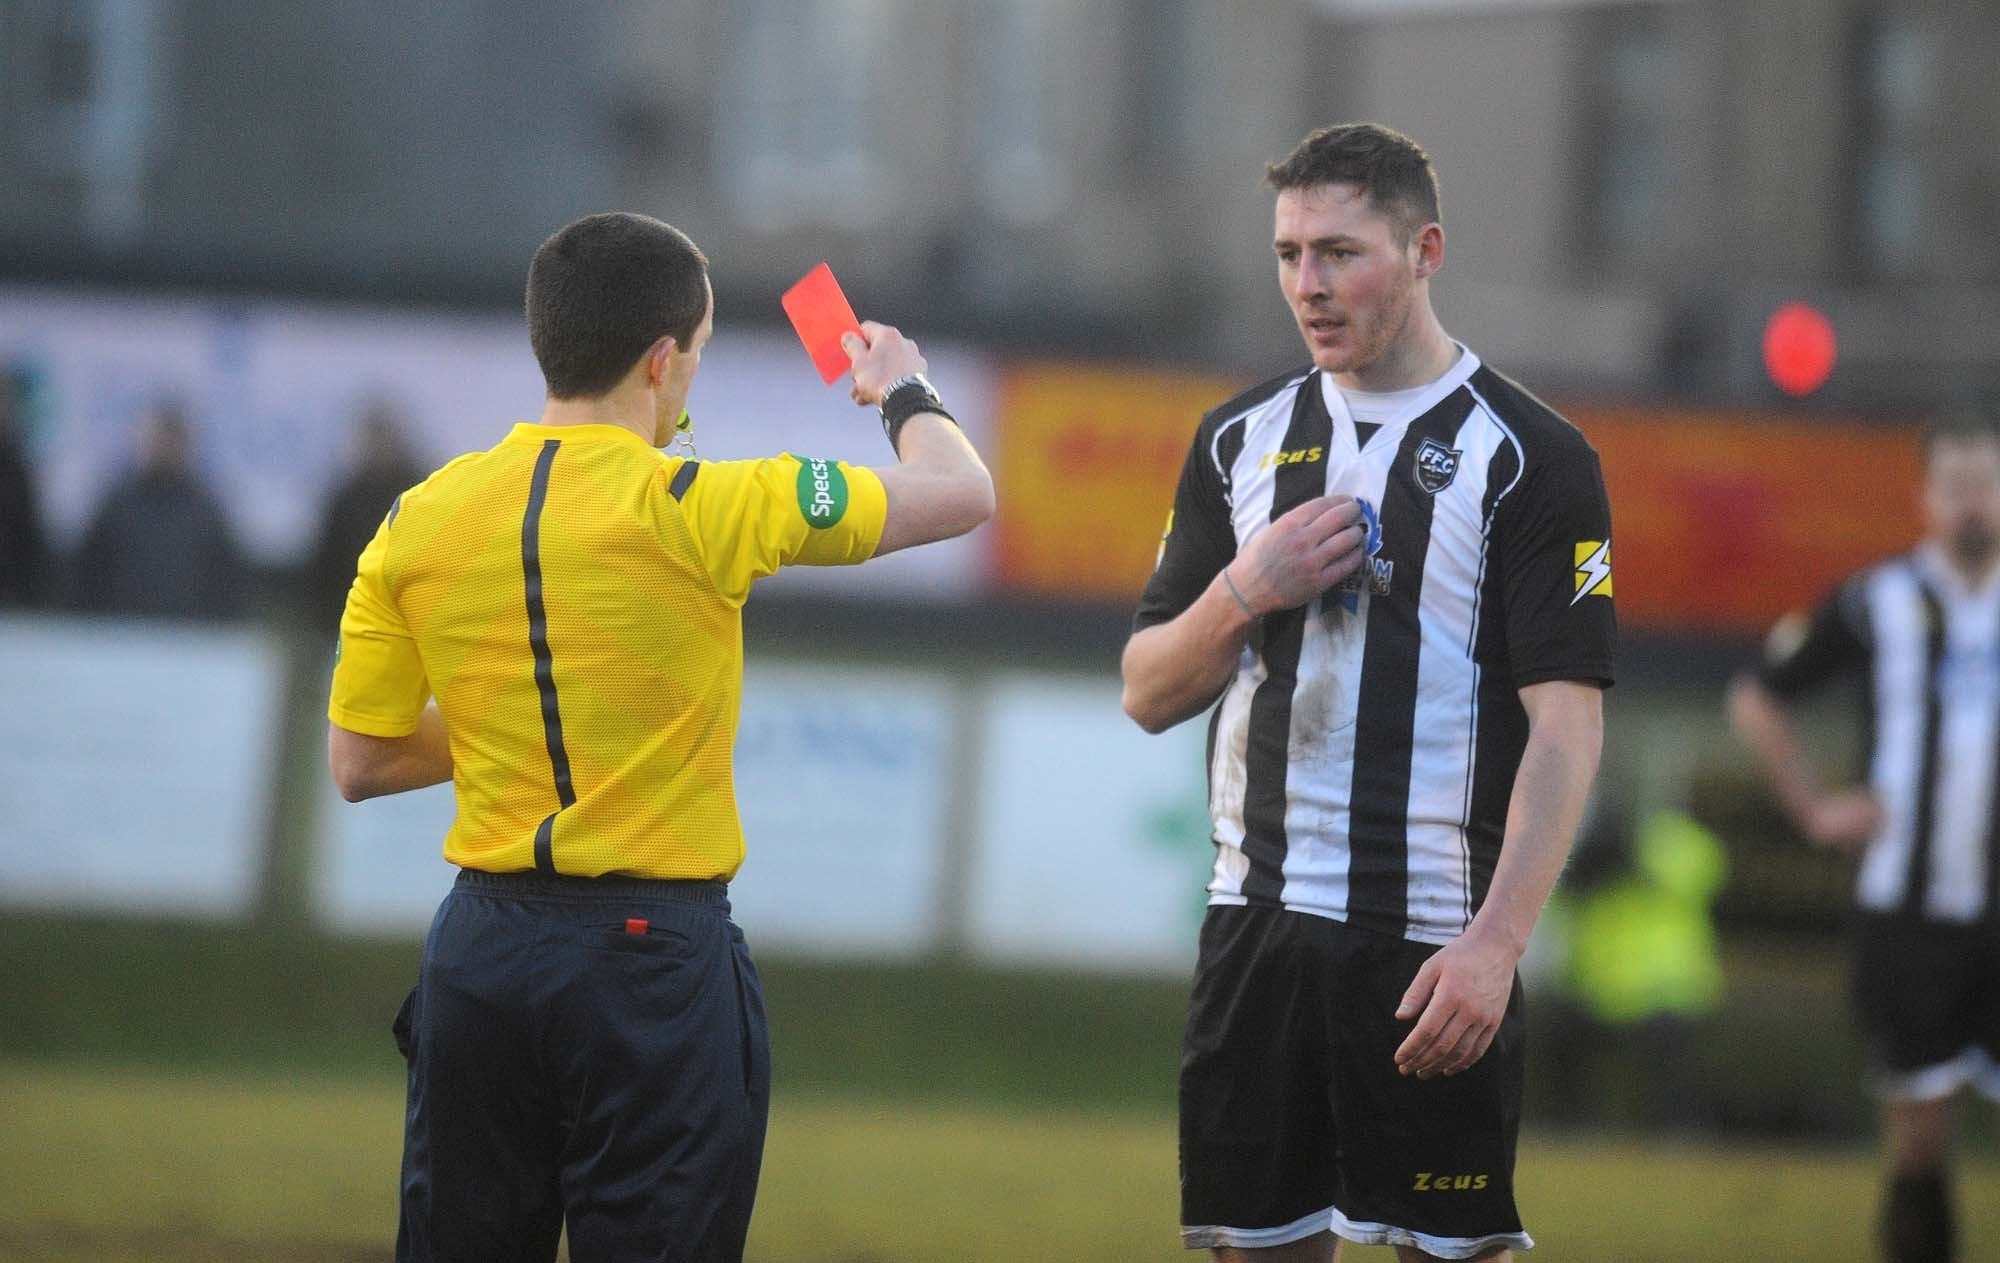 Fraserburgh's Bryan Hay was sent off after receiving two yellow cards today against Wick